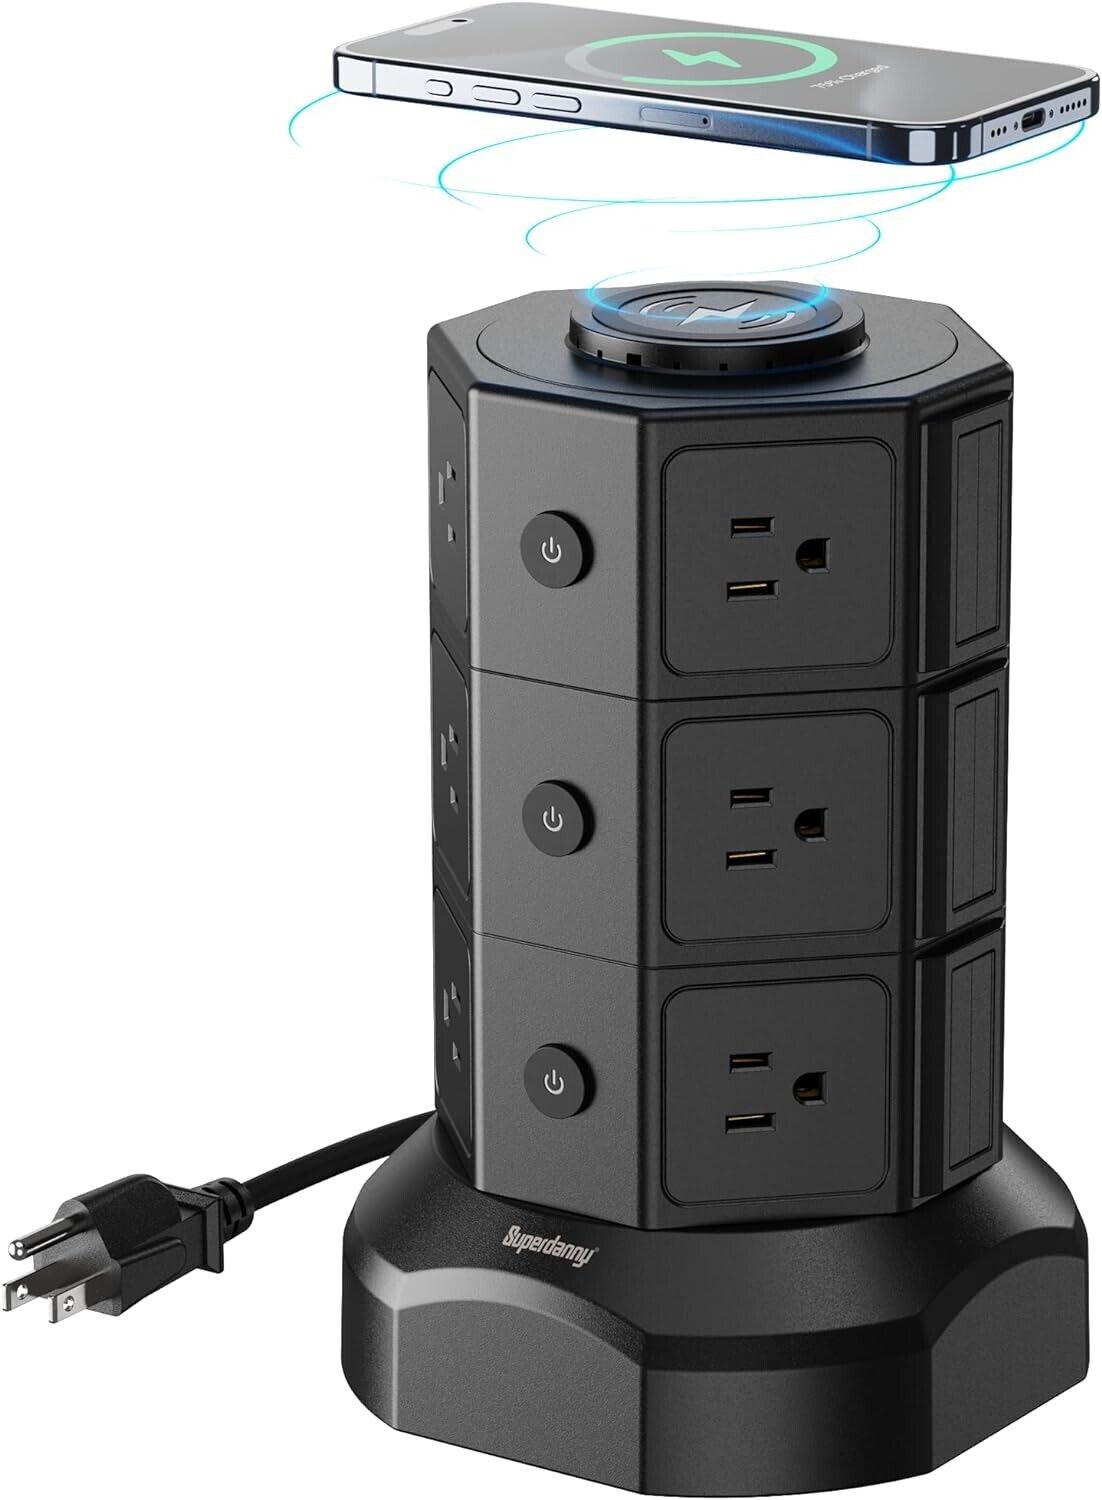 Tower Power Strip with 15W Wireless Charger, SUPERDANNY 1050J Surge Protector